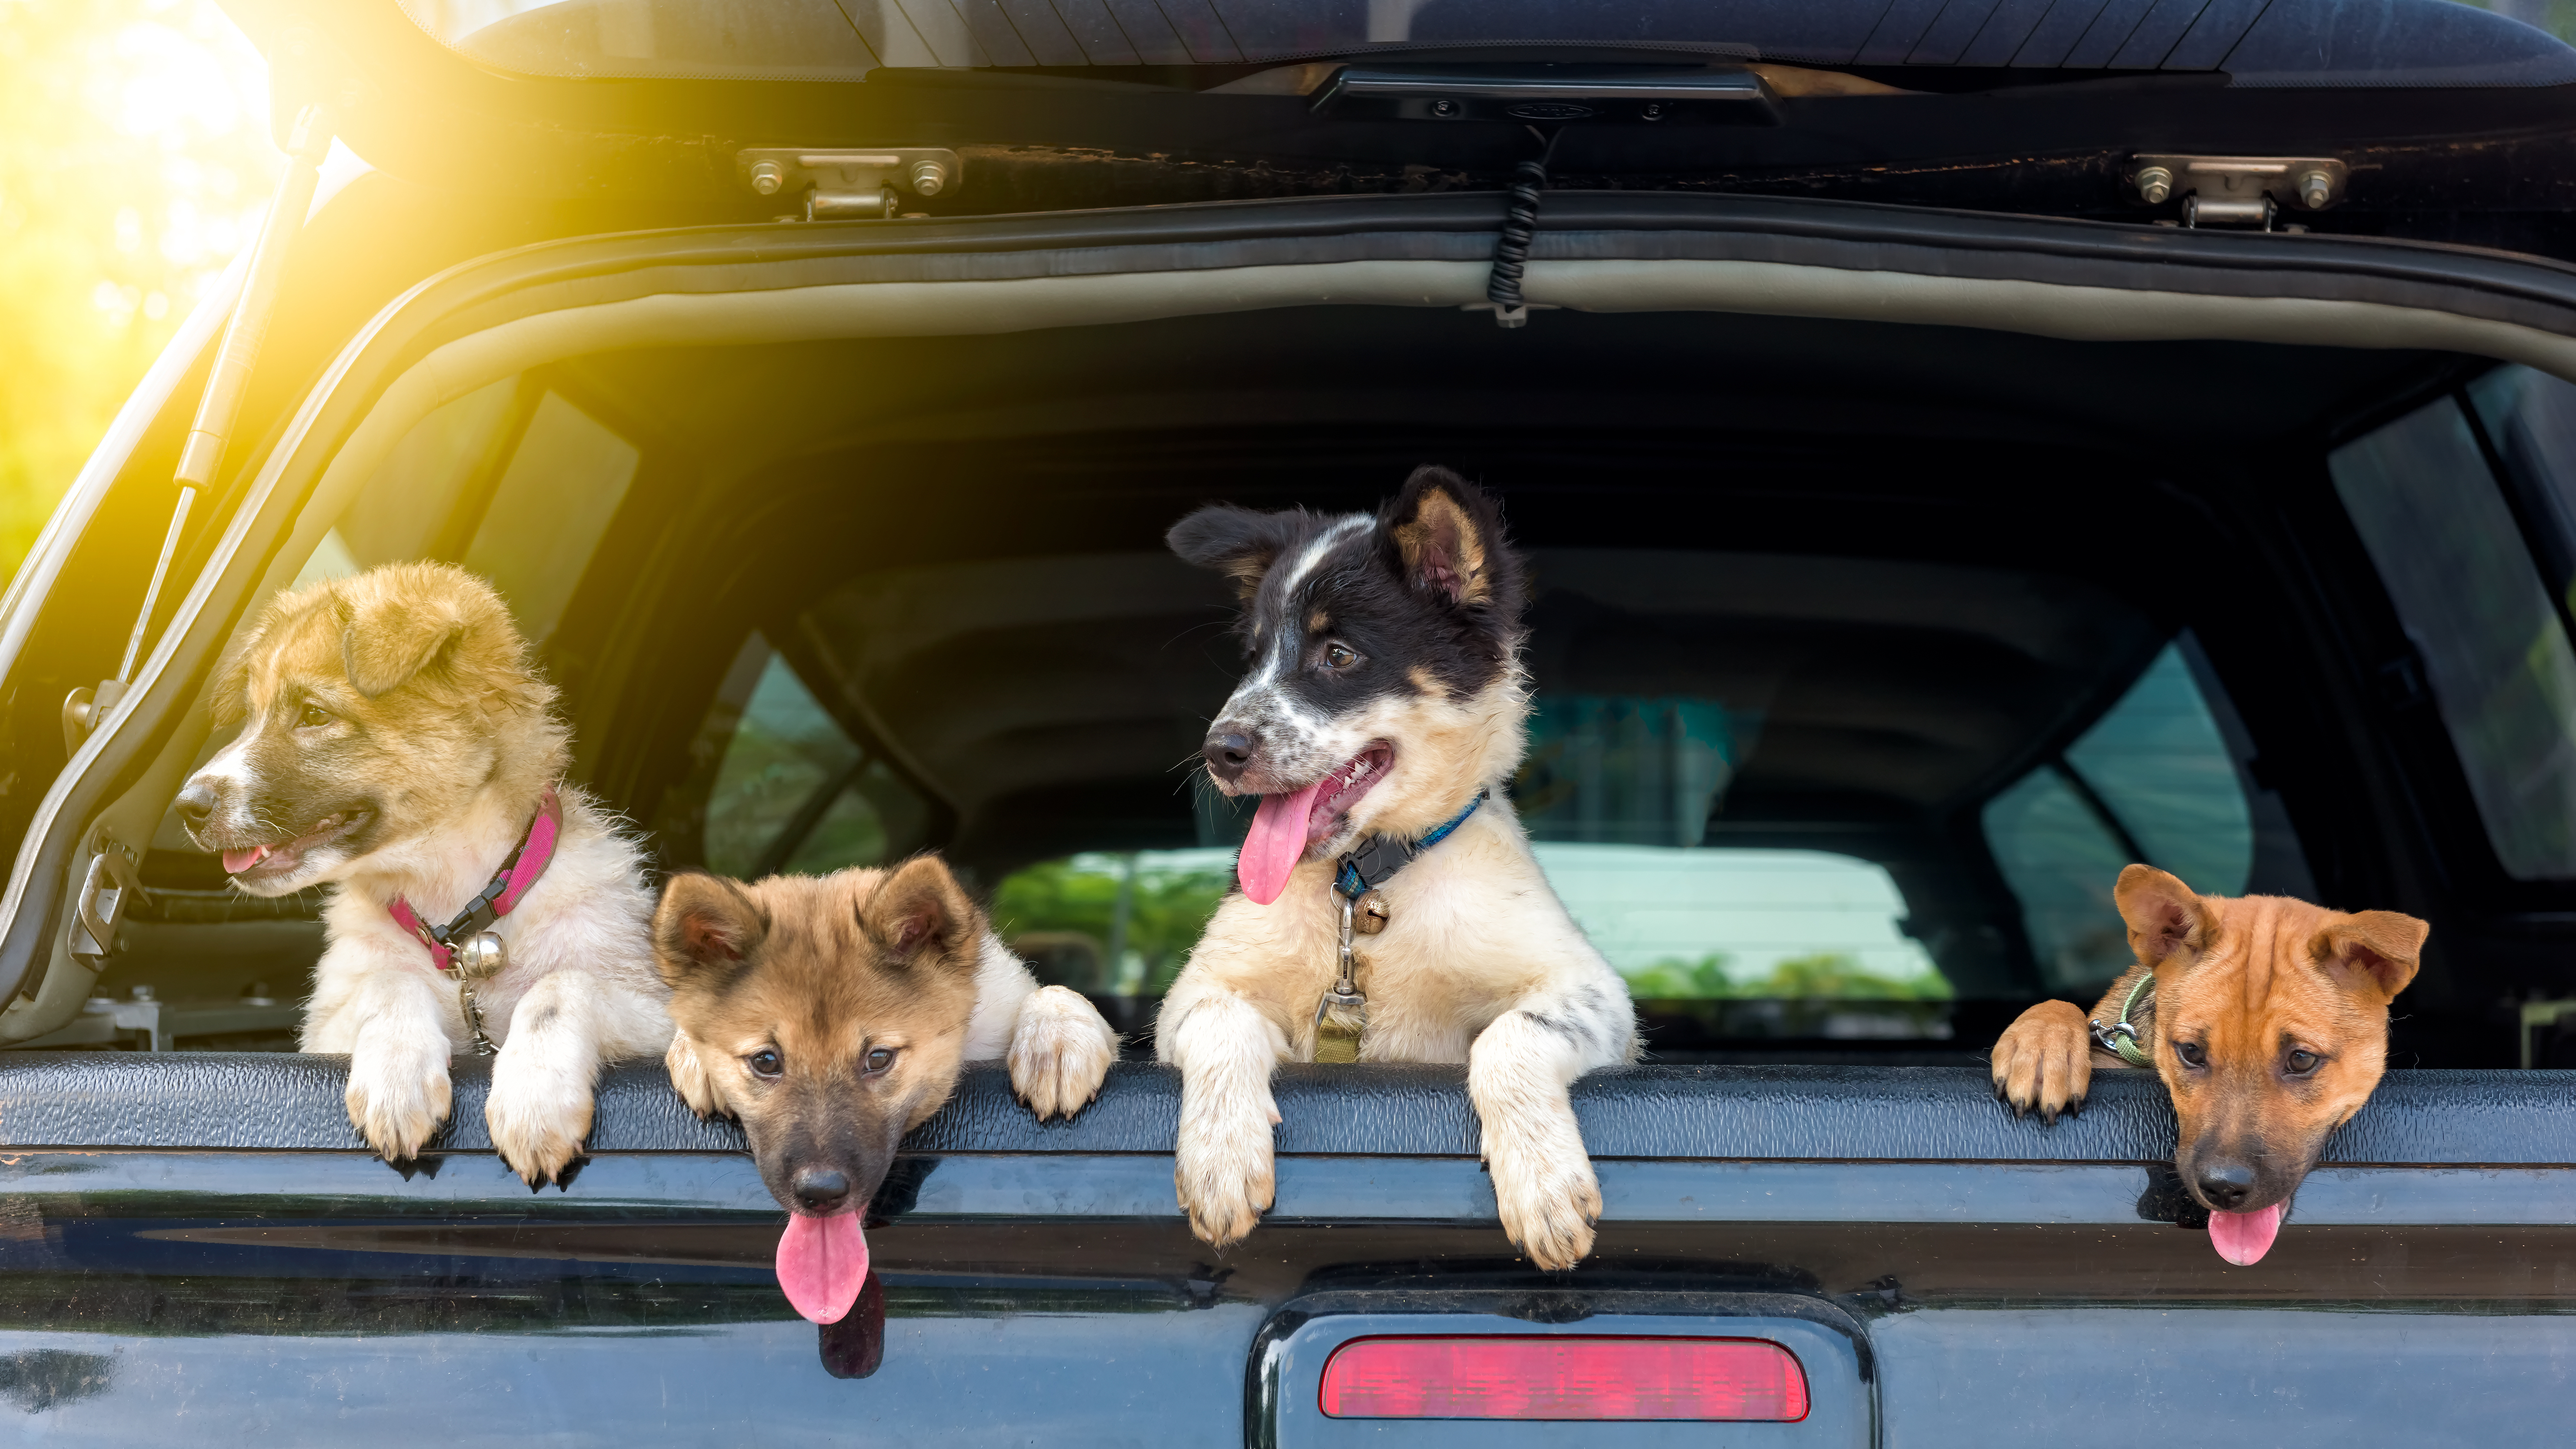 Dogs can dirty up a car quickly! Follow these tips to keep your car clean for you and your pets.